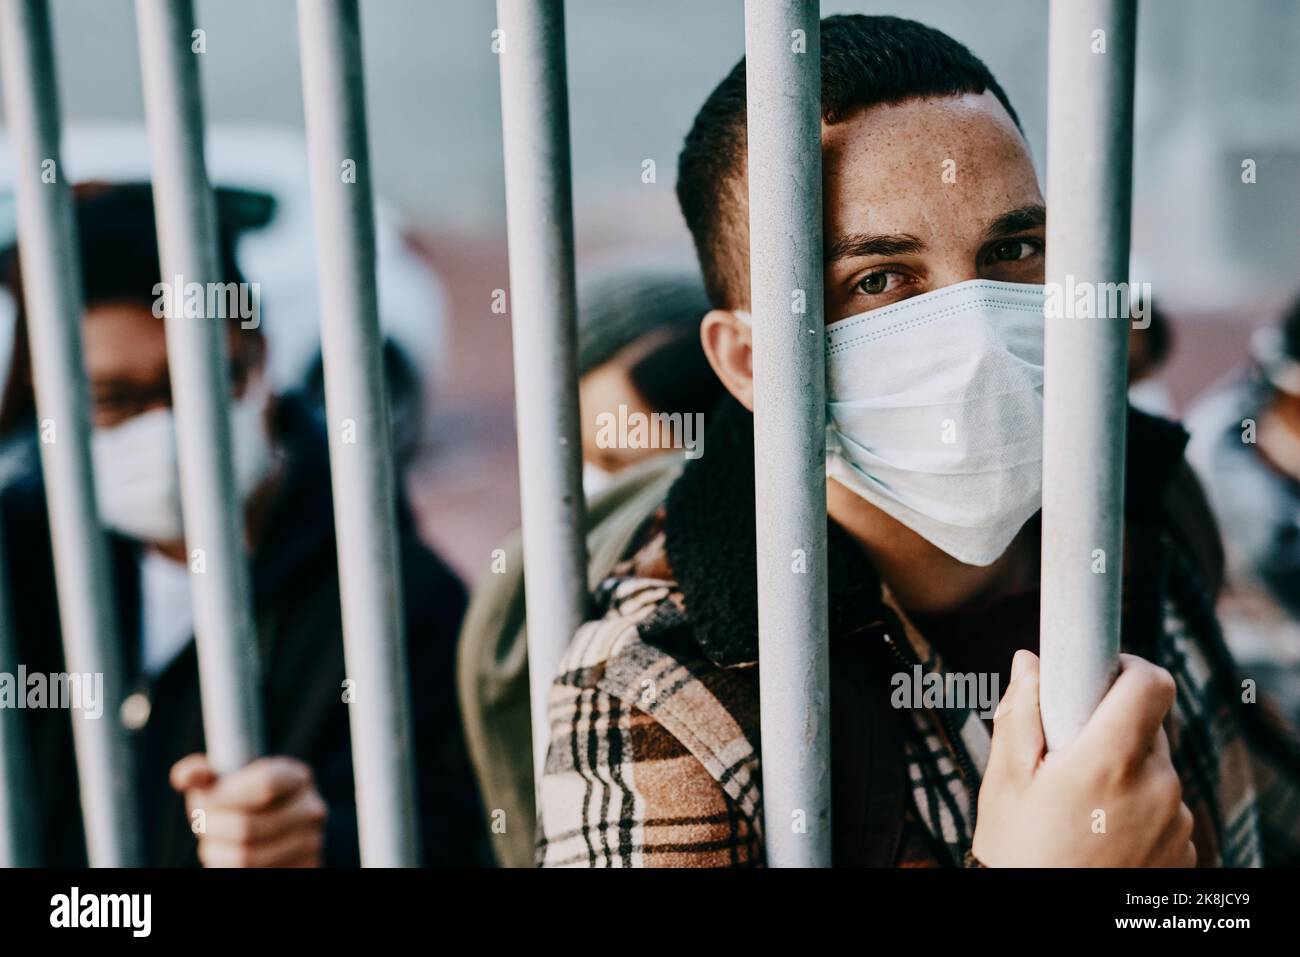 We need a saviour. a young man wearing a mask while stuck behind a gate in a foreign city. Stock Photo